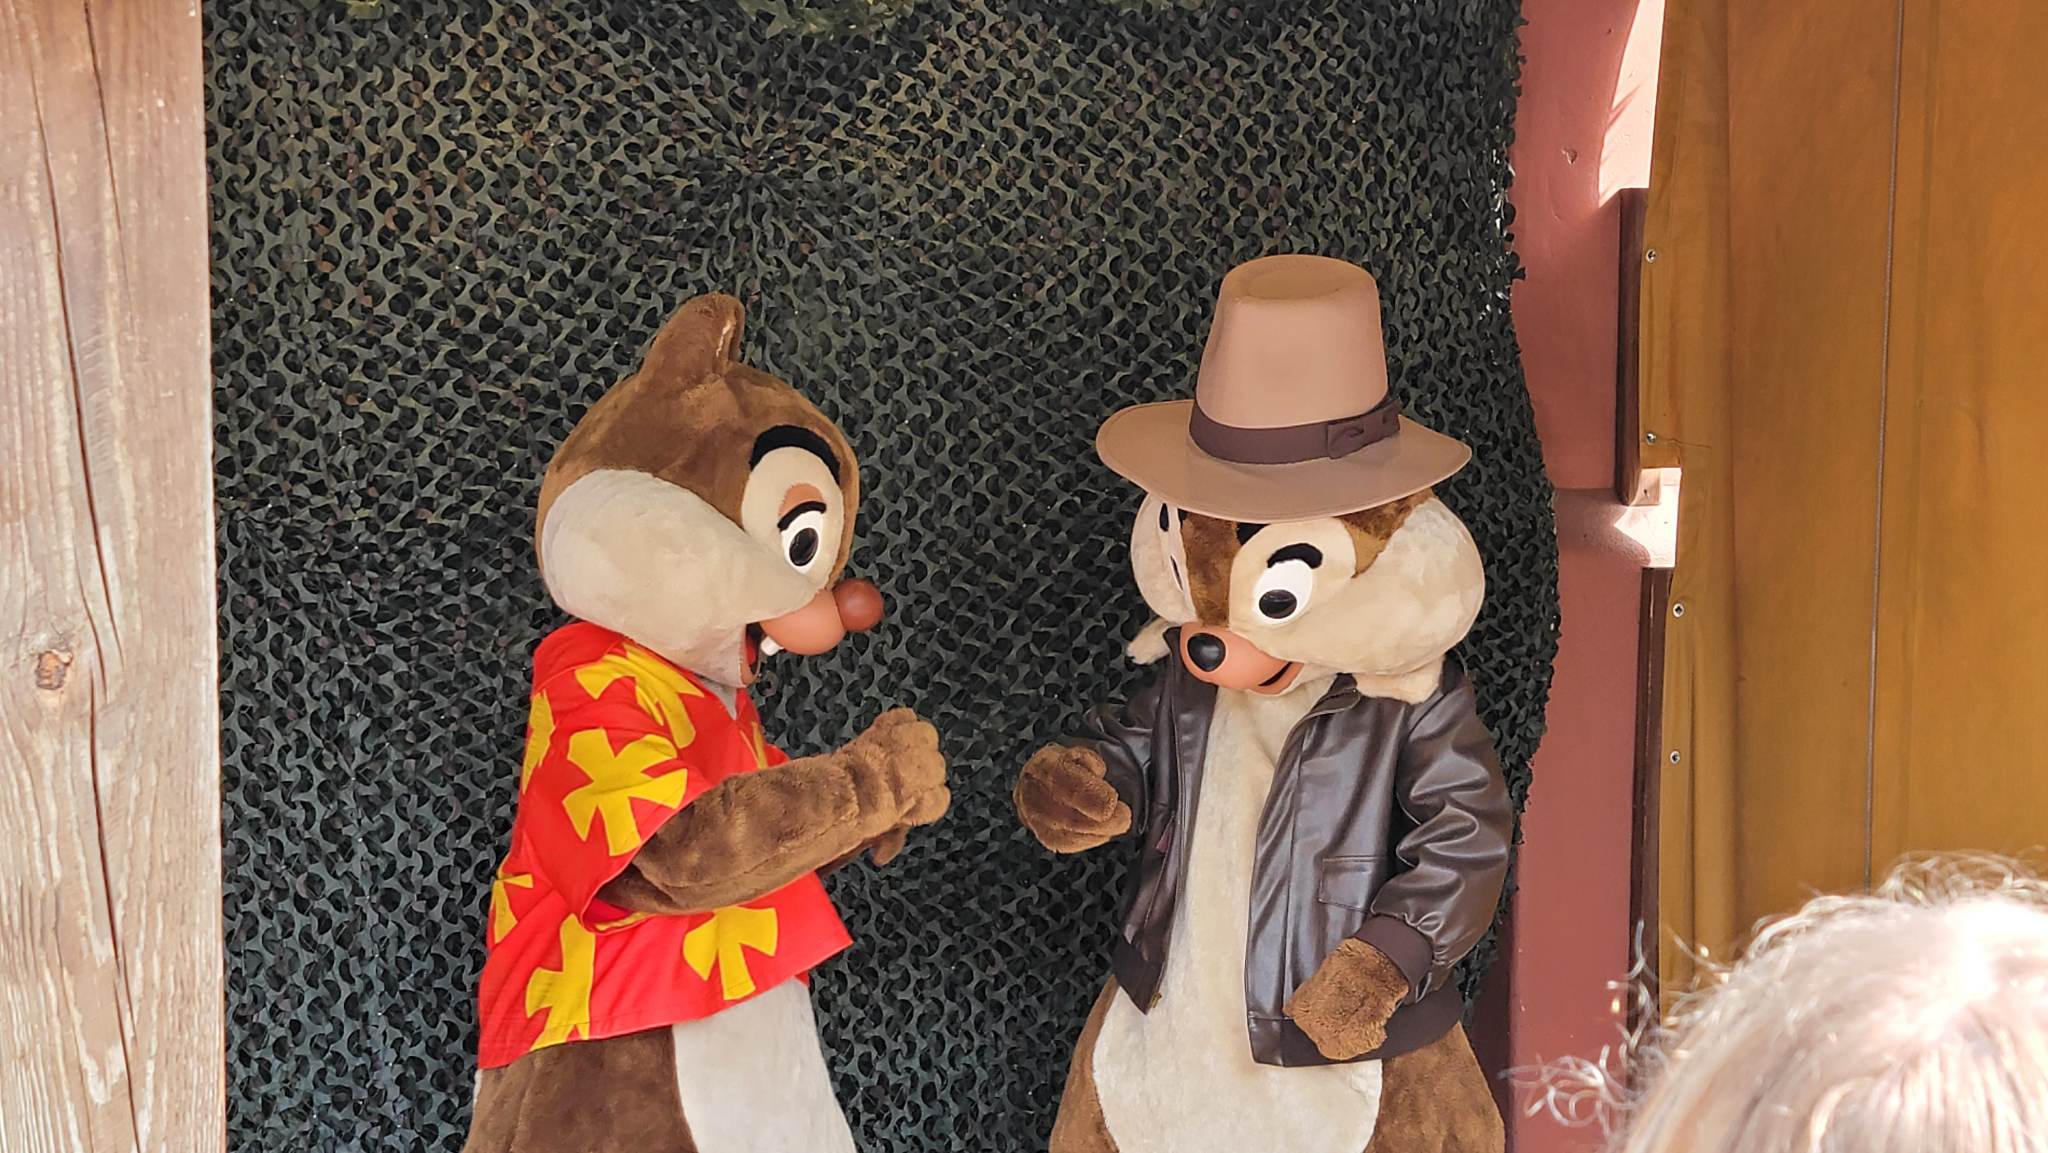 Chip & Dale Rescue Rangers Meet and Greet Relocates to Make Room for Indiana Jones Beverage Outpost